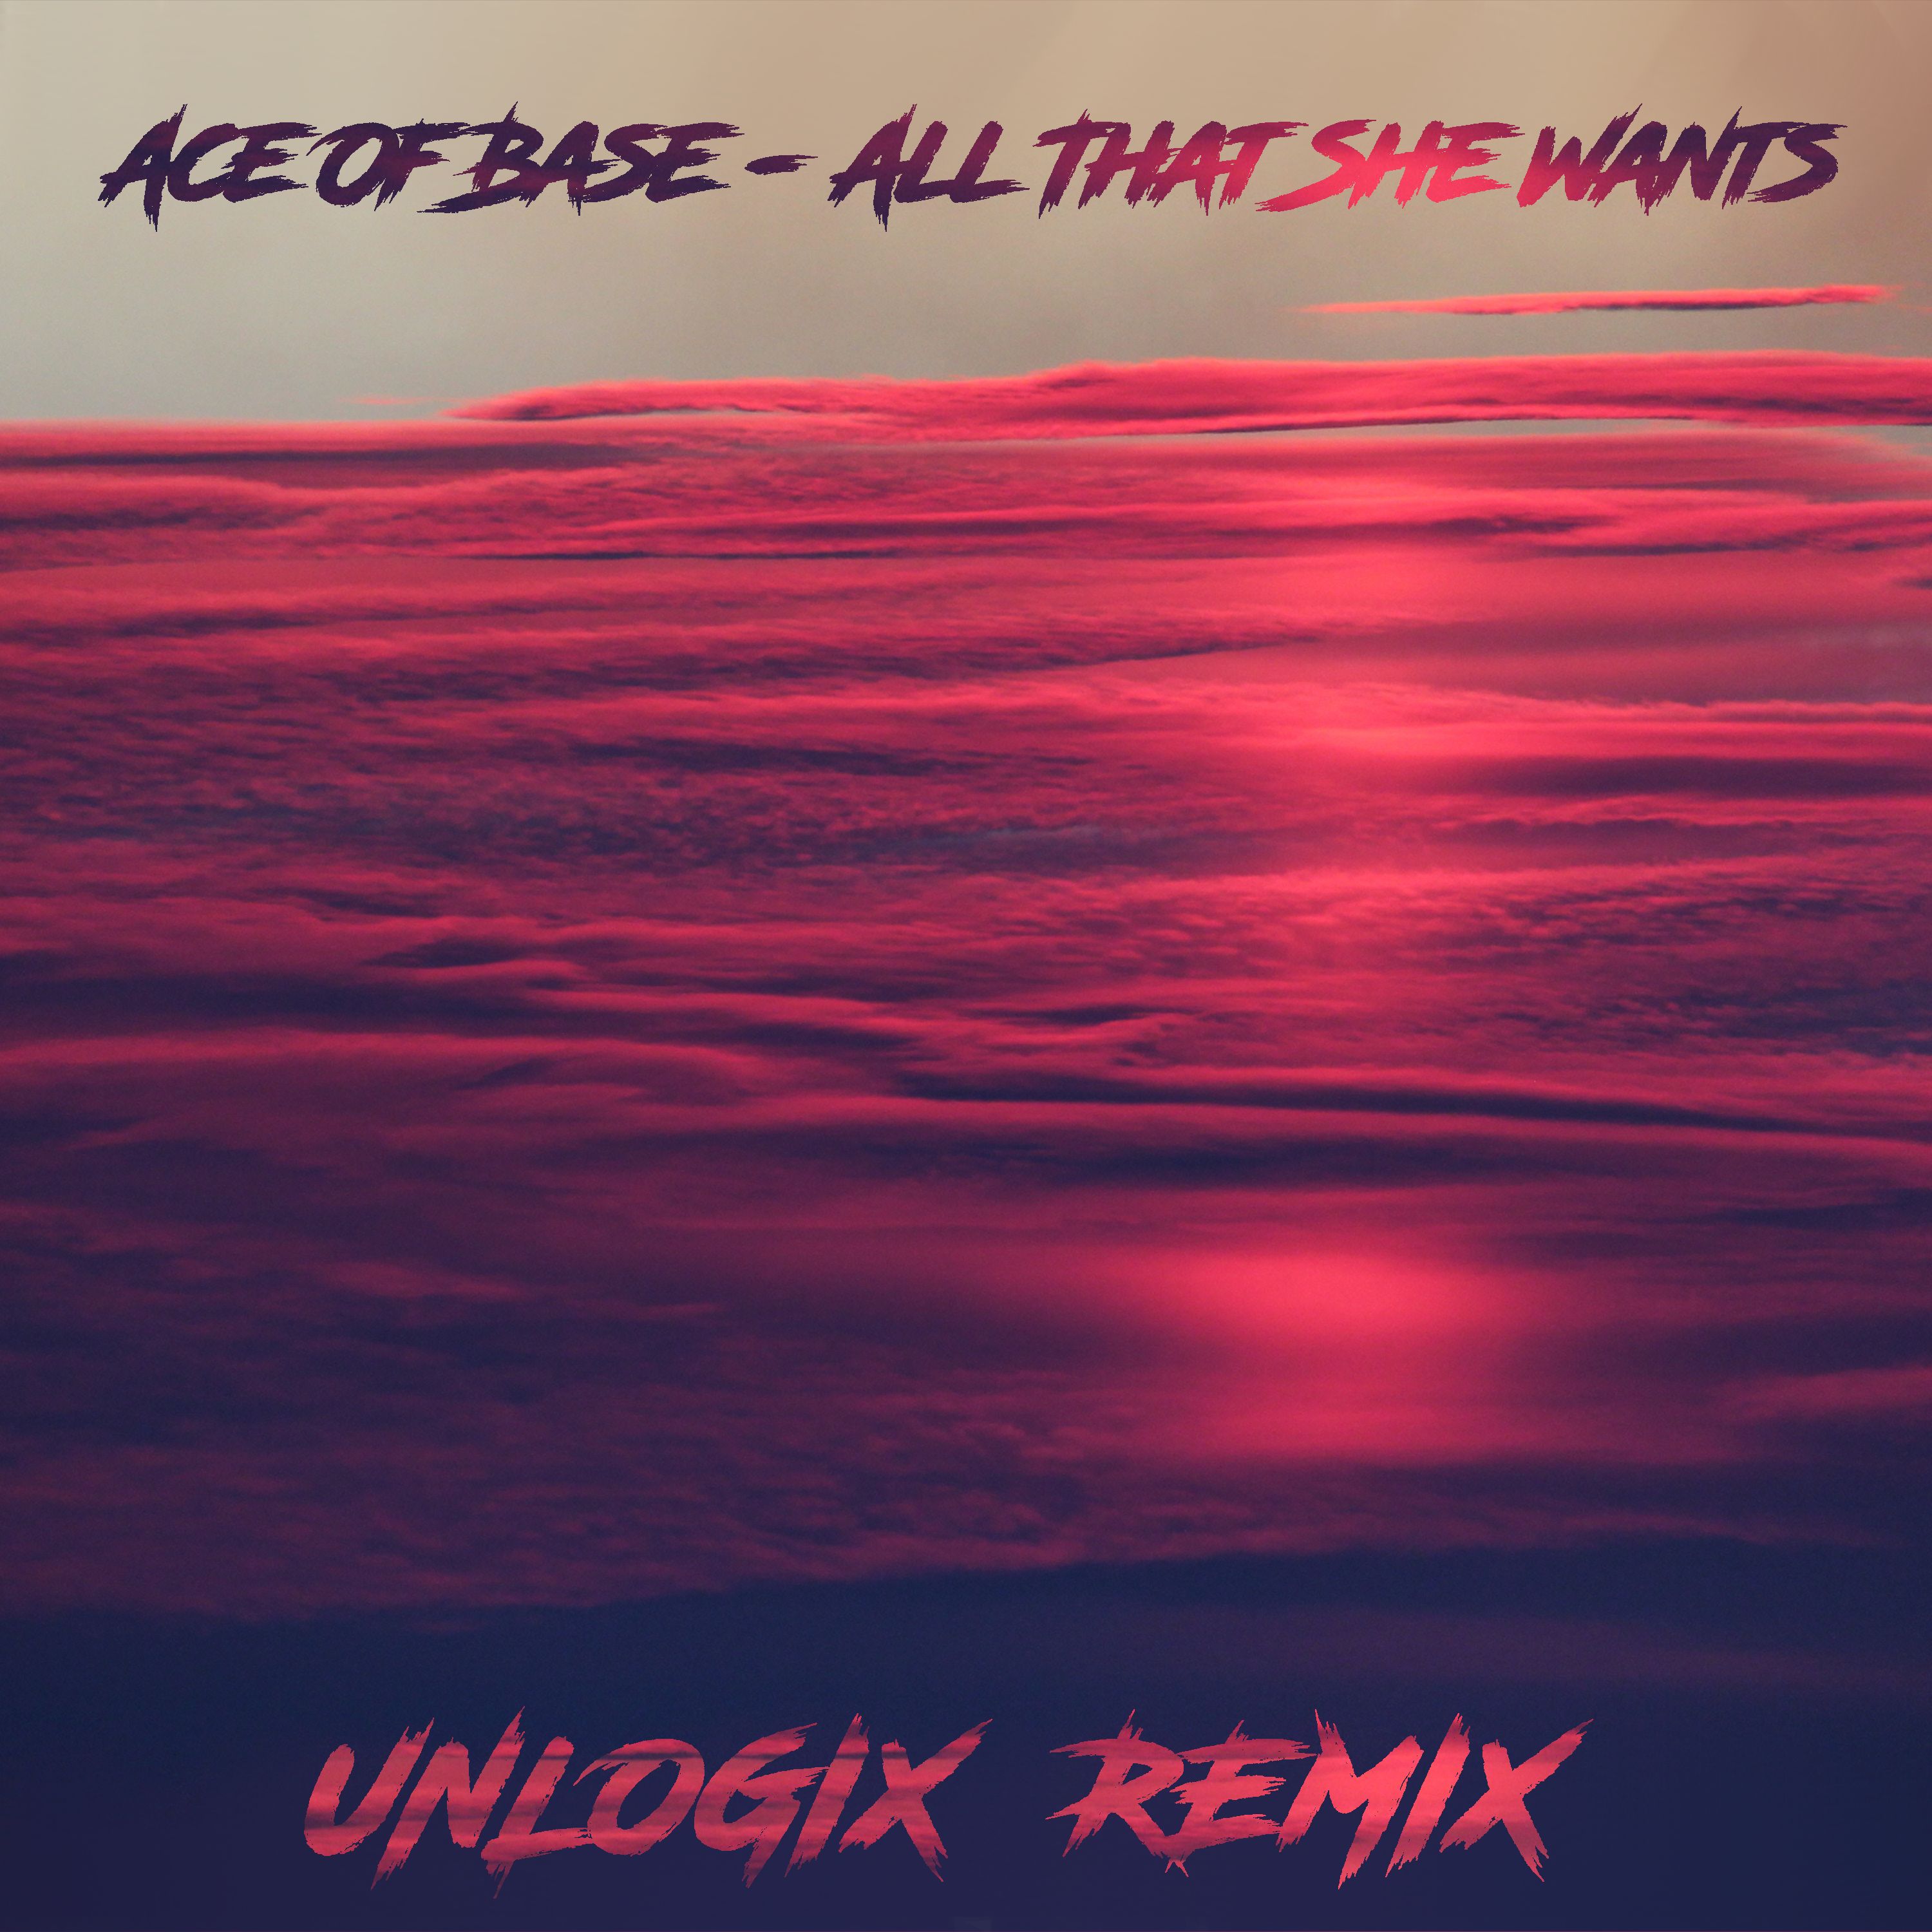 Télécharger Ace Of Base - All That She Wants ( Unlogix Remix ) "FREE DOWNLOAD"